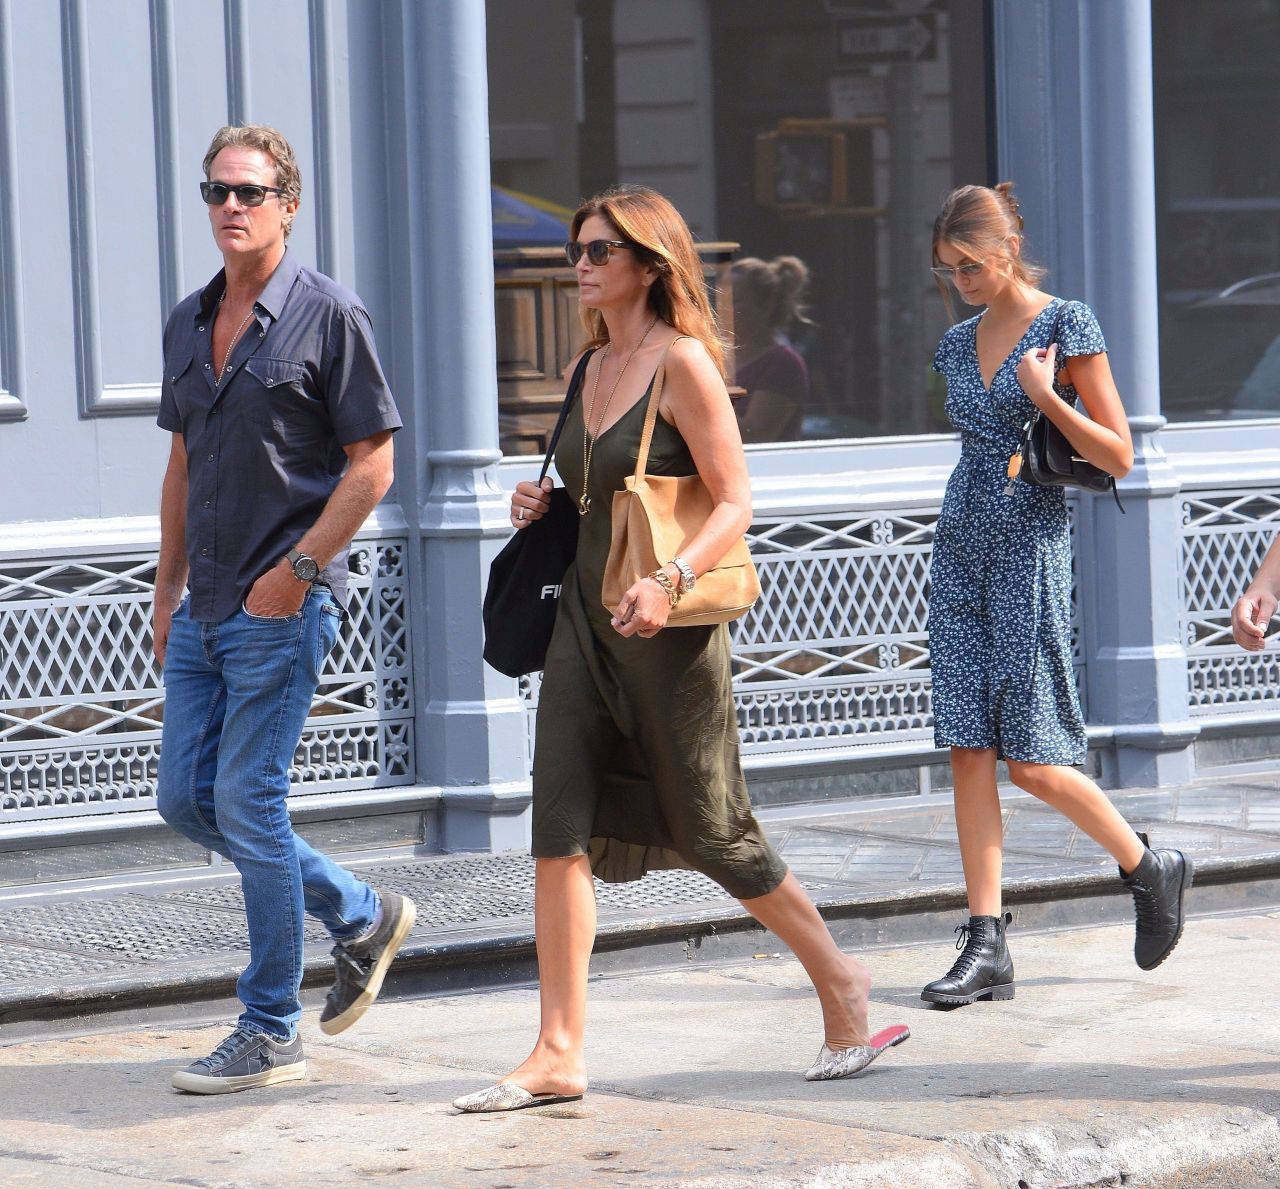 cindy-crawford-and-rande-gerber-out-in-nyc-08-06-2019-3.jpg